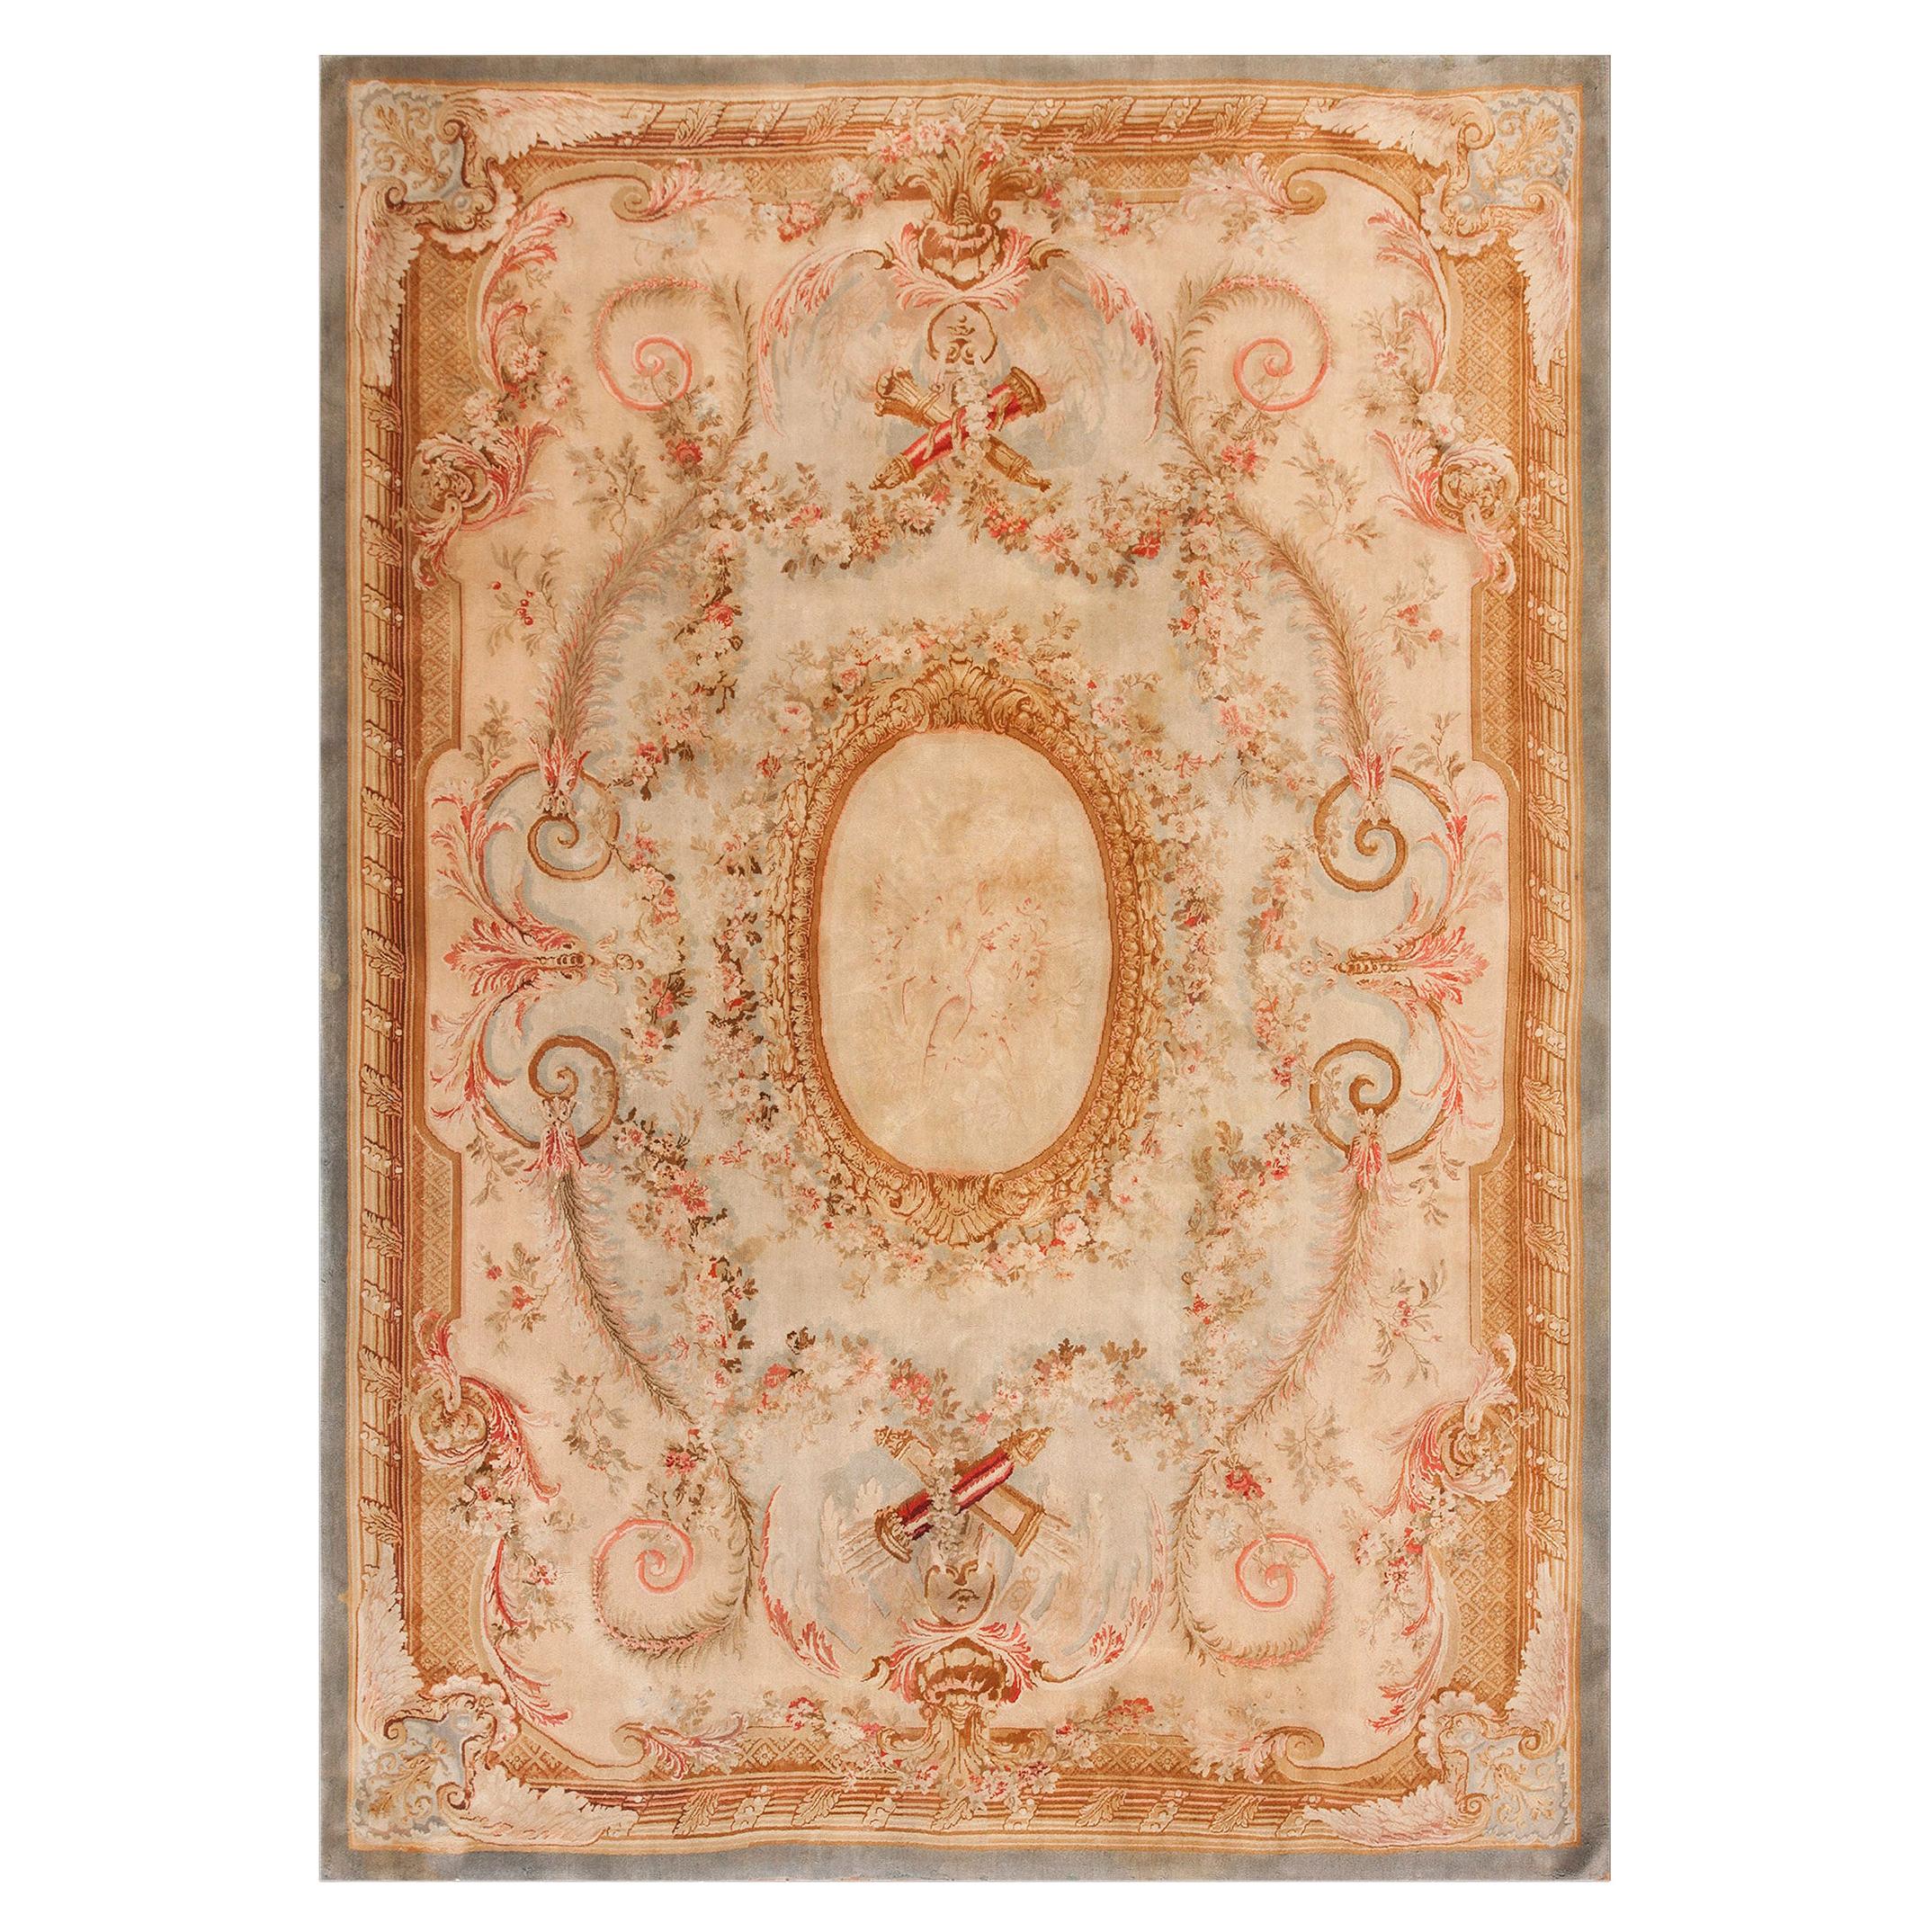 19th Century French Savonnerie Carpet ( 8'8" x 12'3" - 265 x 373 ) For Sale